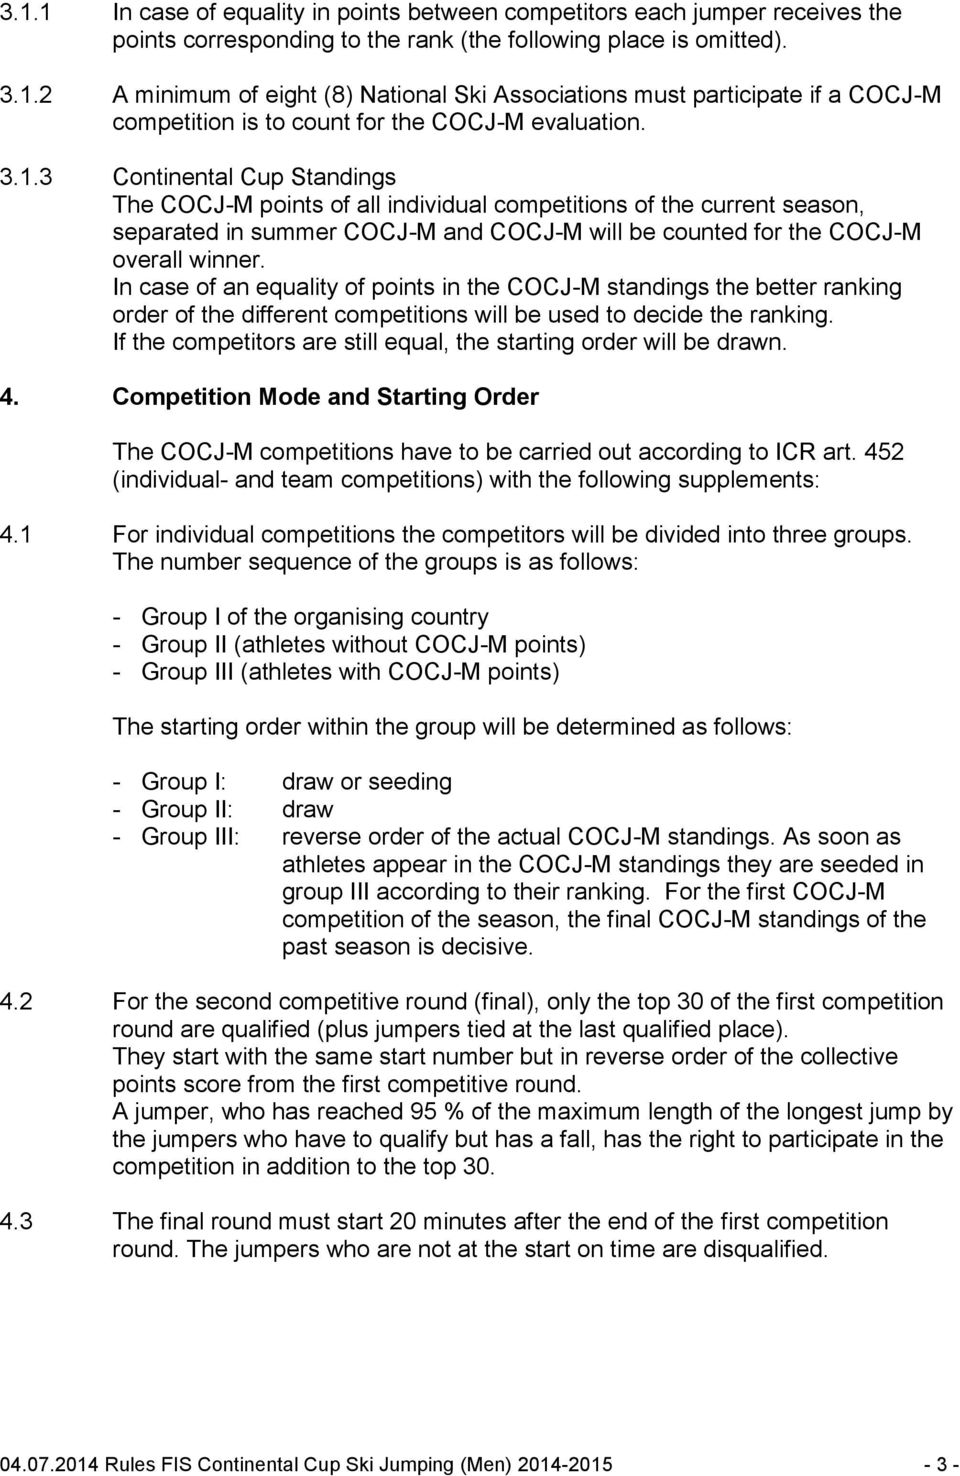 In case of an equality of points in the COCJ-M standings the better ranking order of the different competitions will be used to decide the ranking.